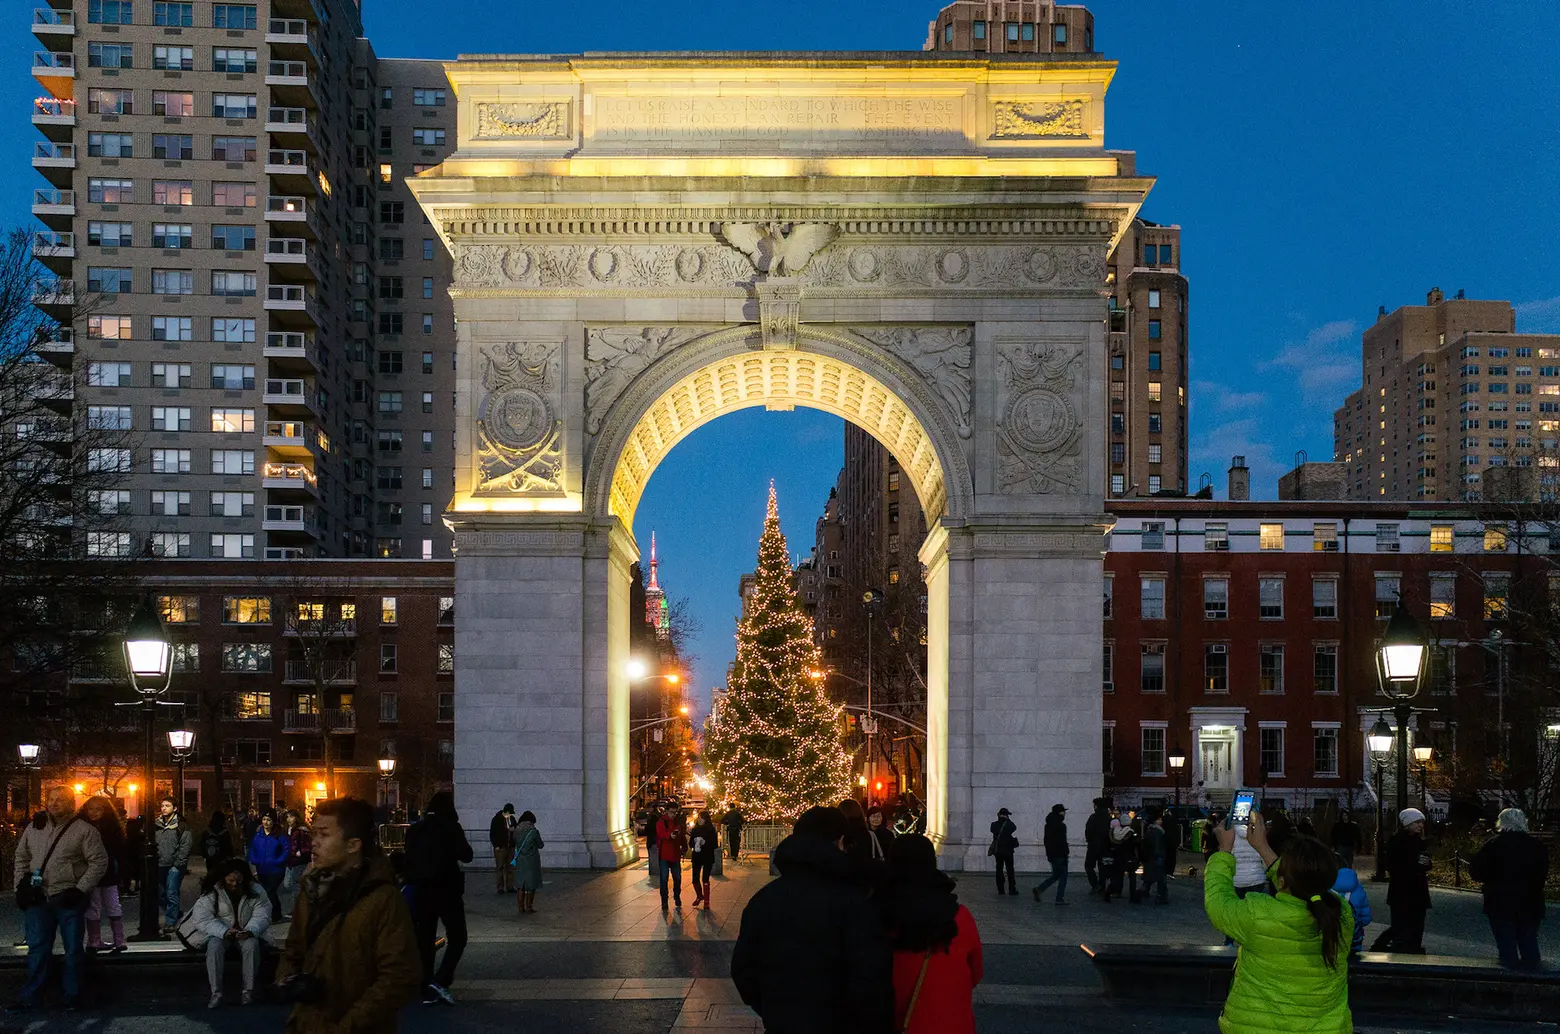 More than 80 NYC parks will shine bright with holiday light displays